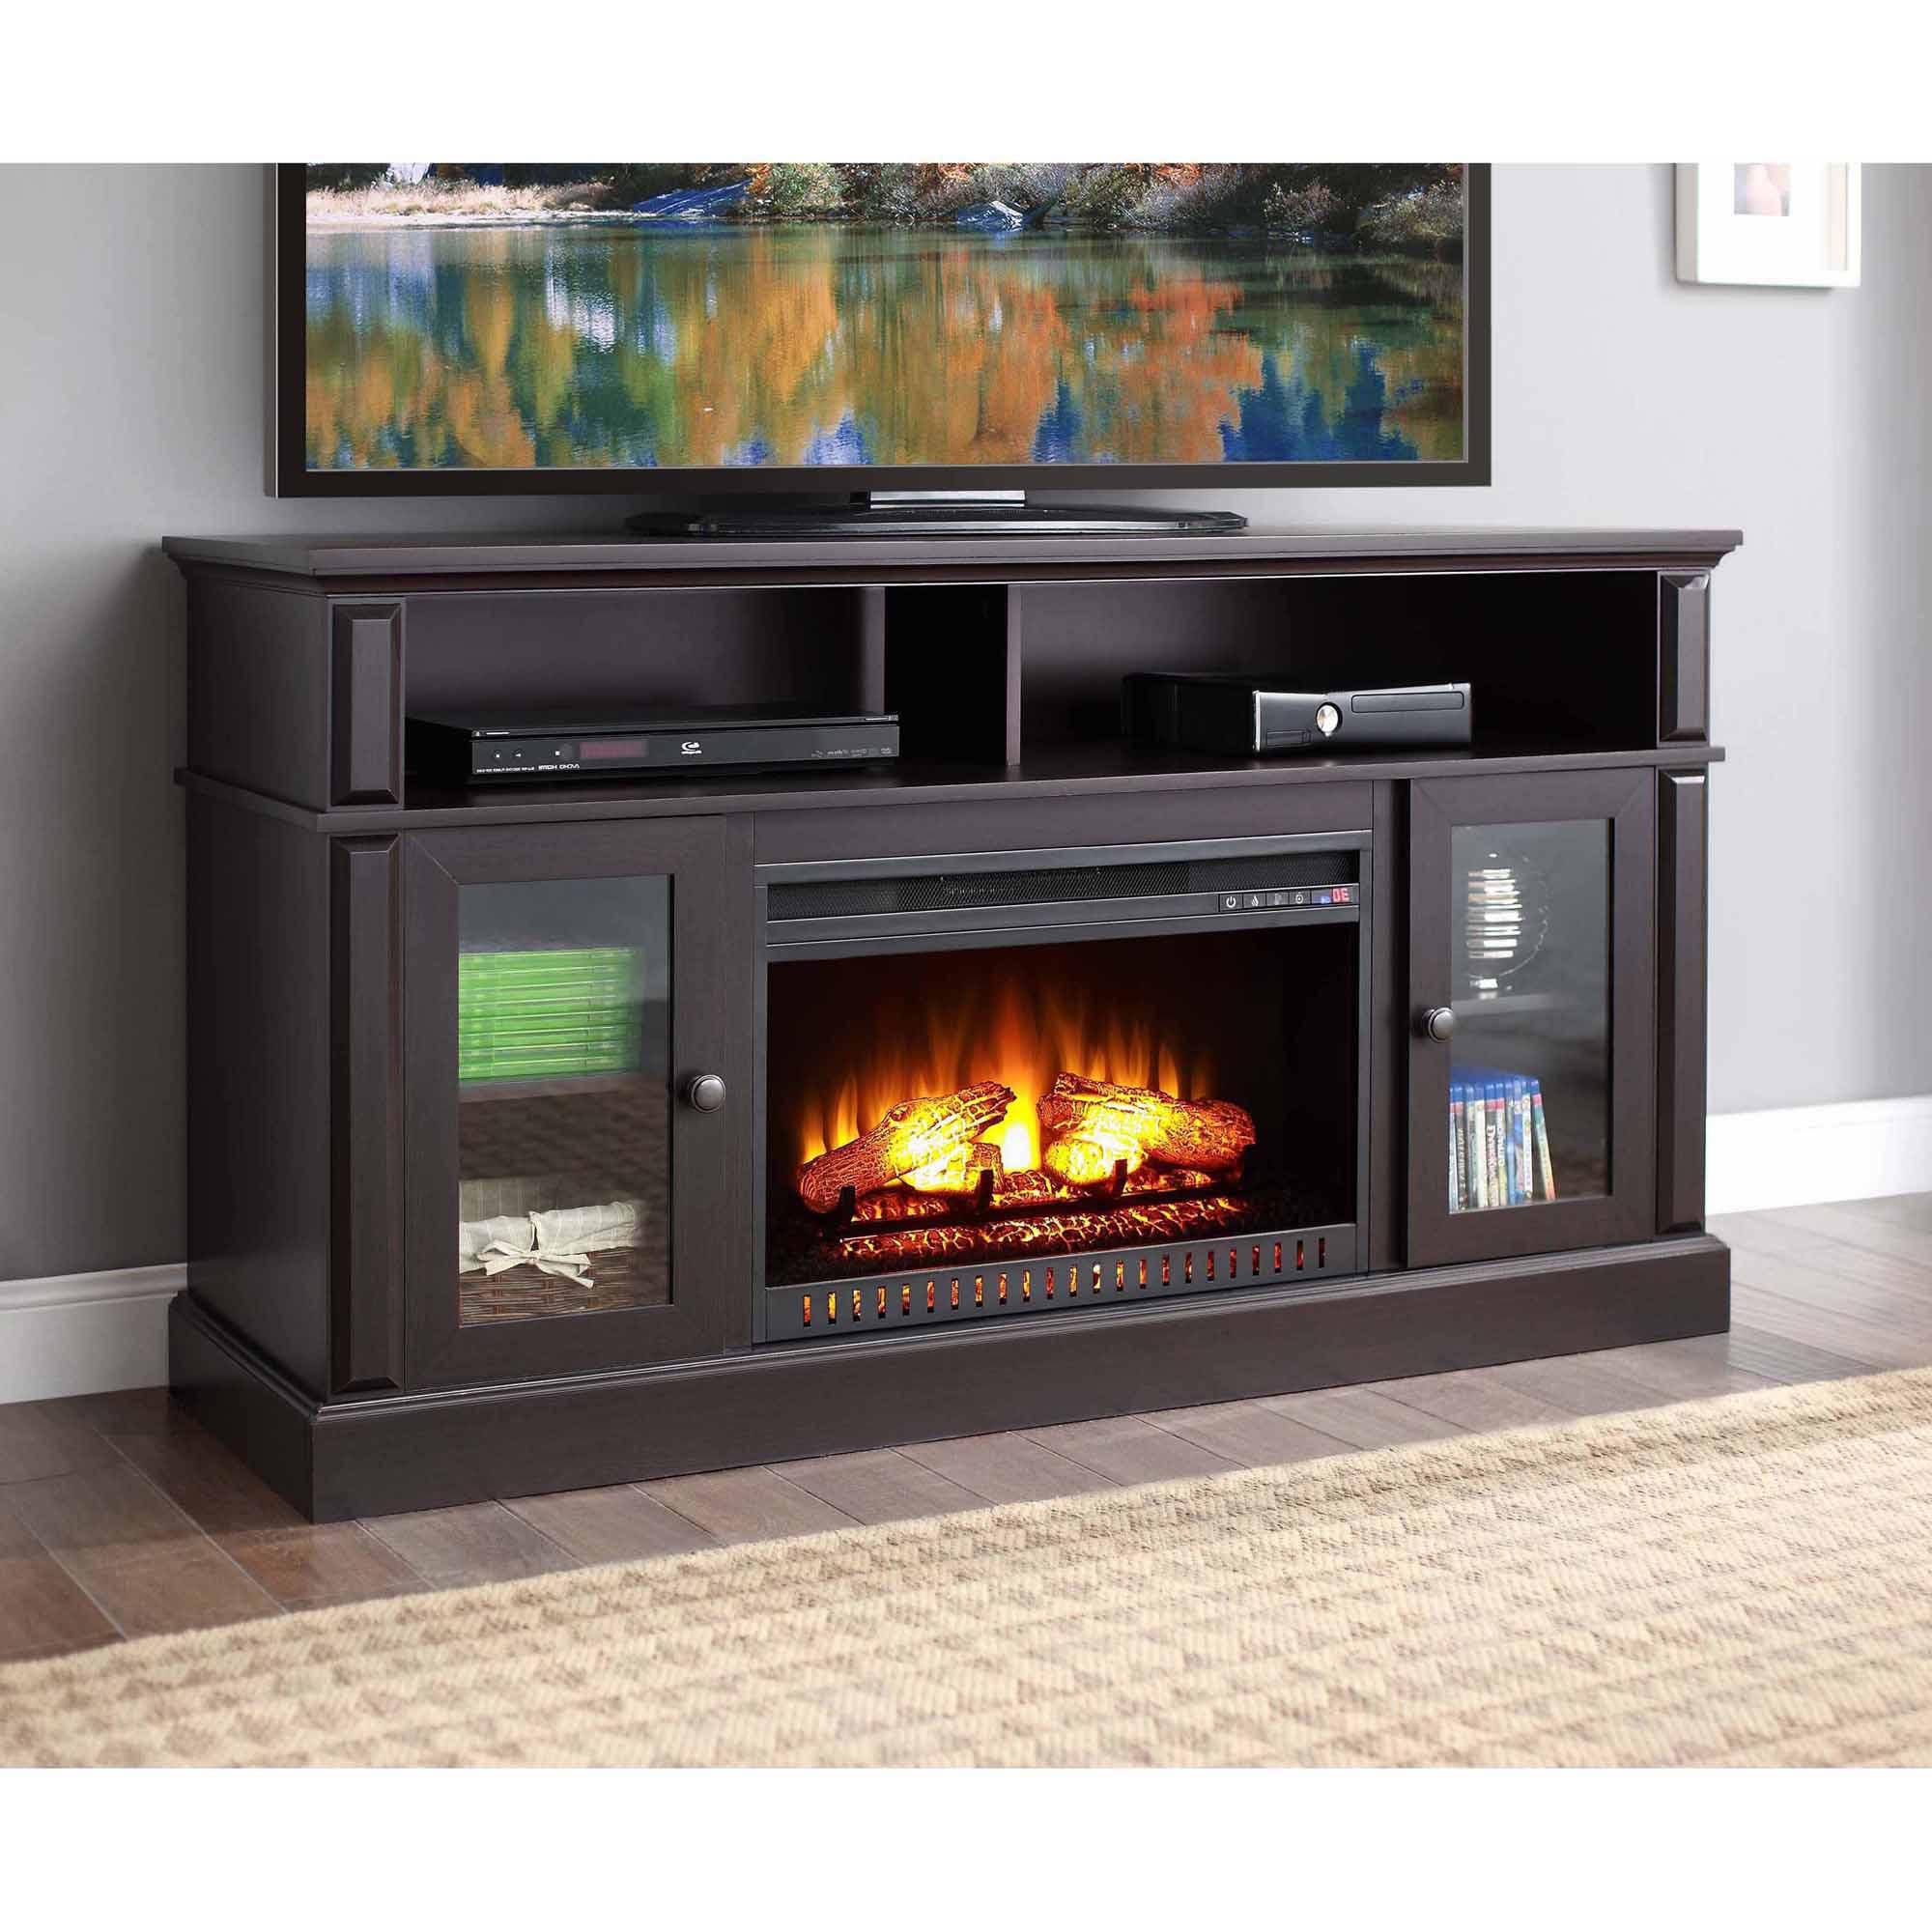 Whalen Barston Media Fireplace For Tv's Up To 70, Multiple Pertaining To Fireplace Media Console Tv Stands With Weathered Finish (View 8 of 20)